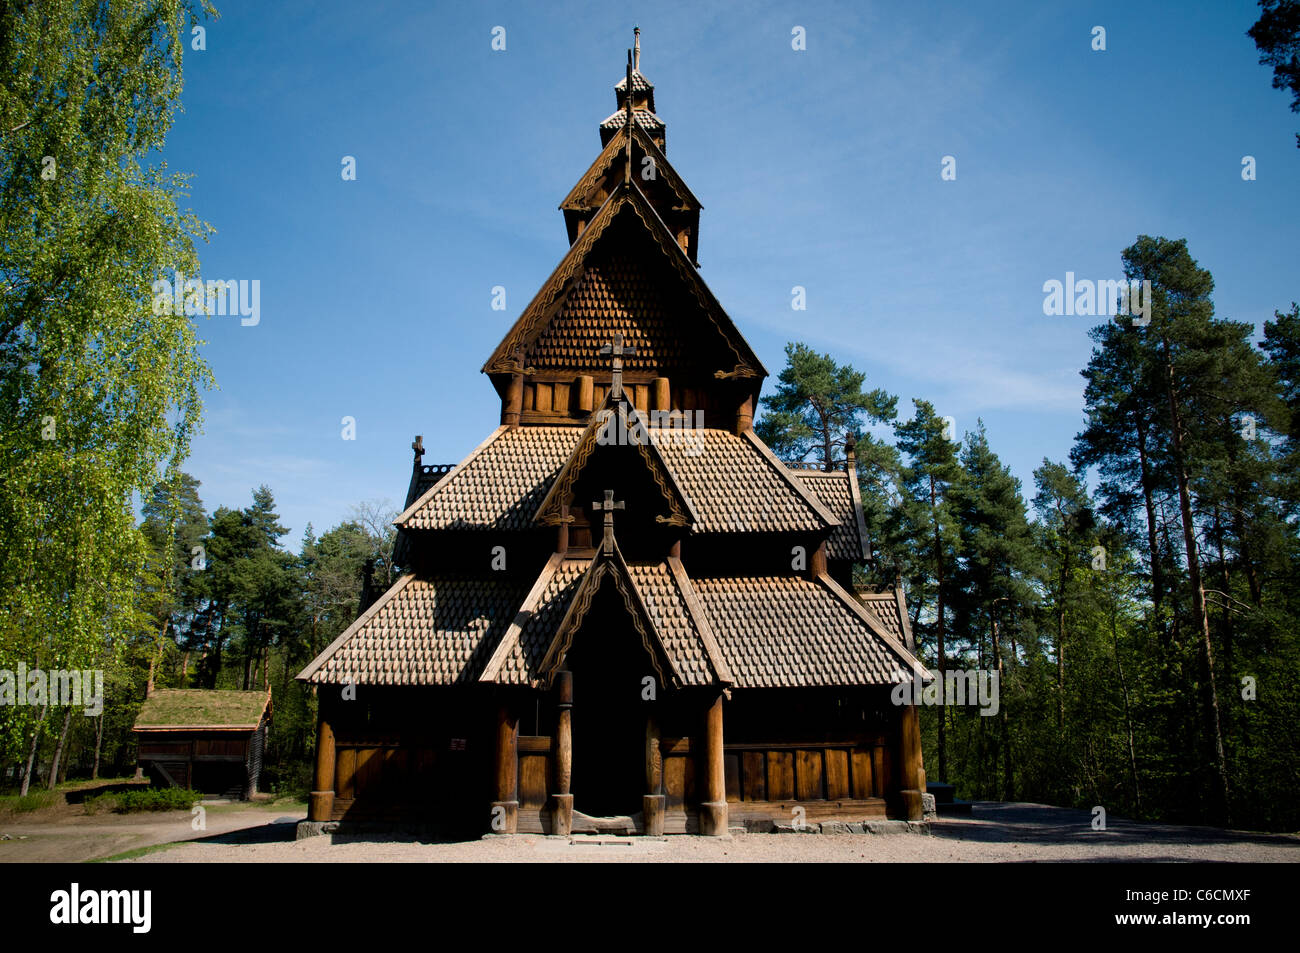 The Gol stave church (Gol stavkirke) in the Norwegian Museum of Cultural History of Oslo Stock Photo